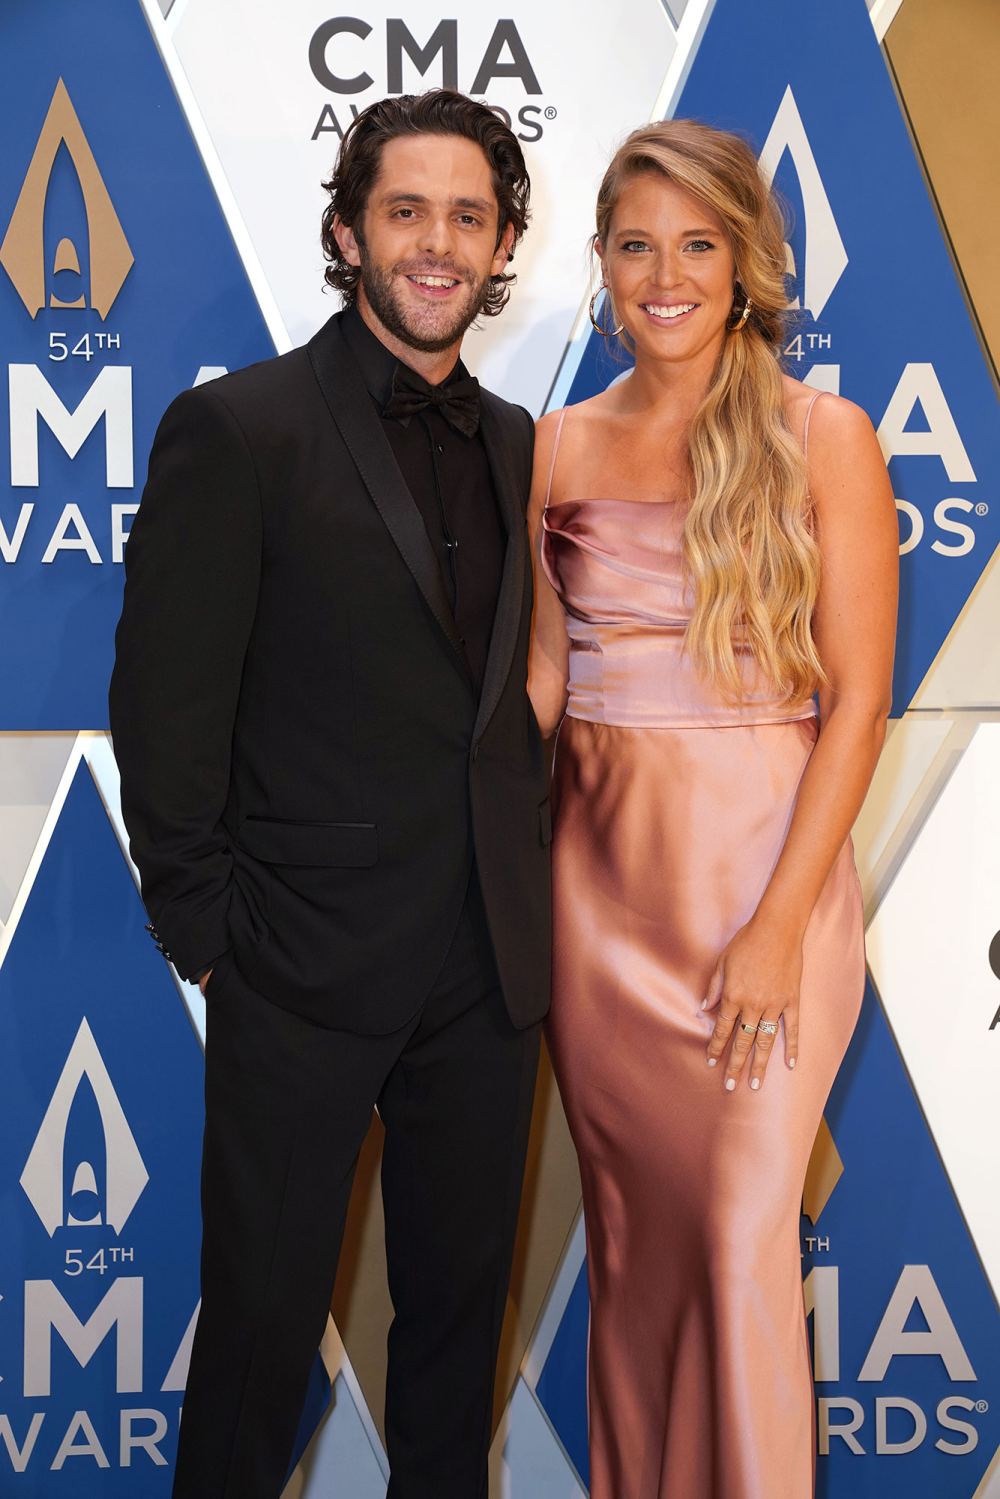 Thomas Rhett Explains How He Found Out About Wife Lauren Akins Pregnancy